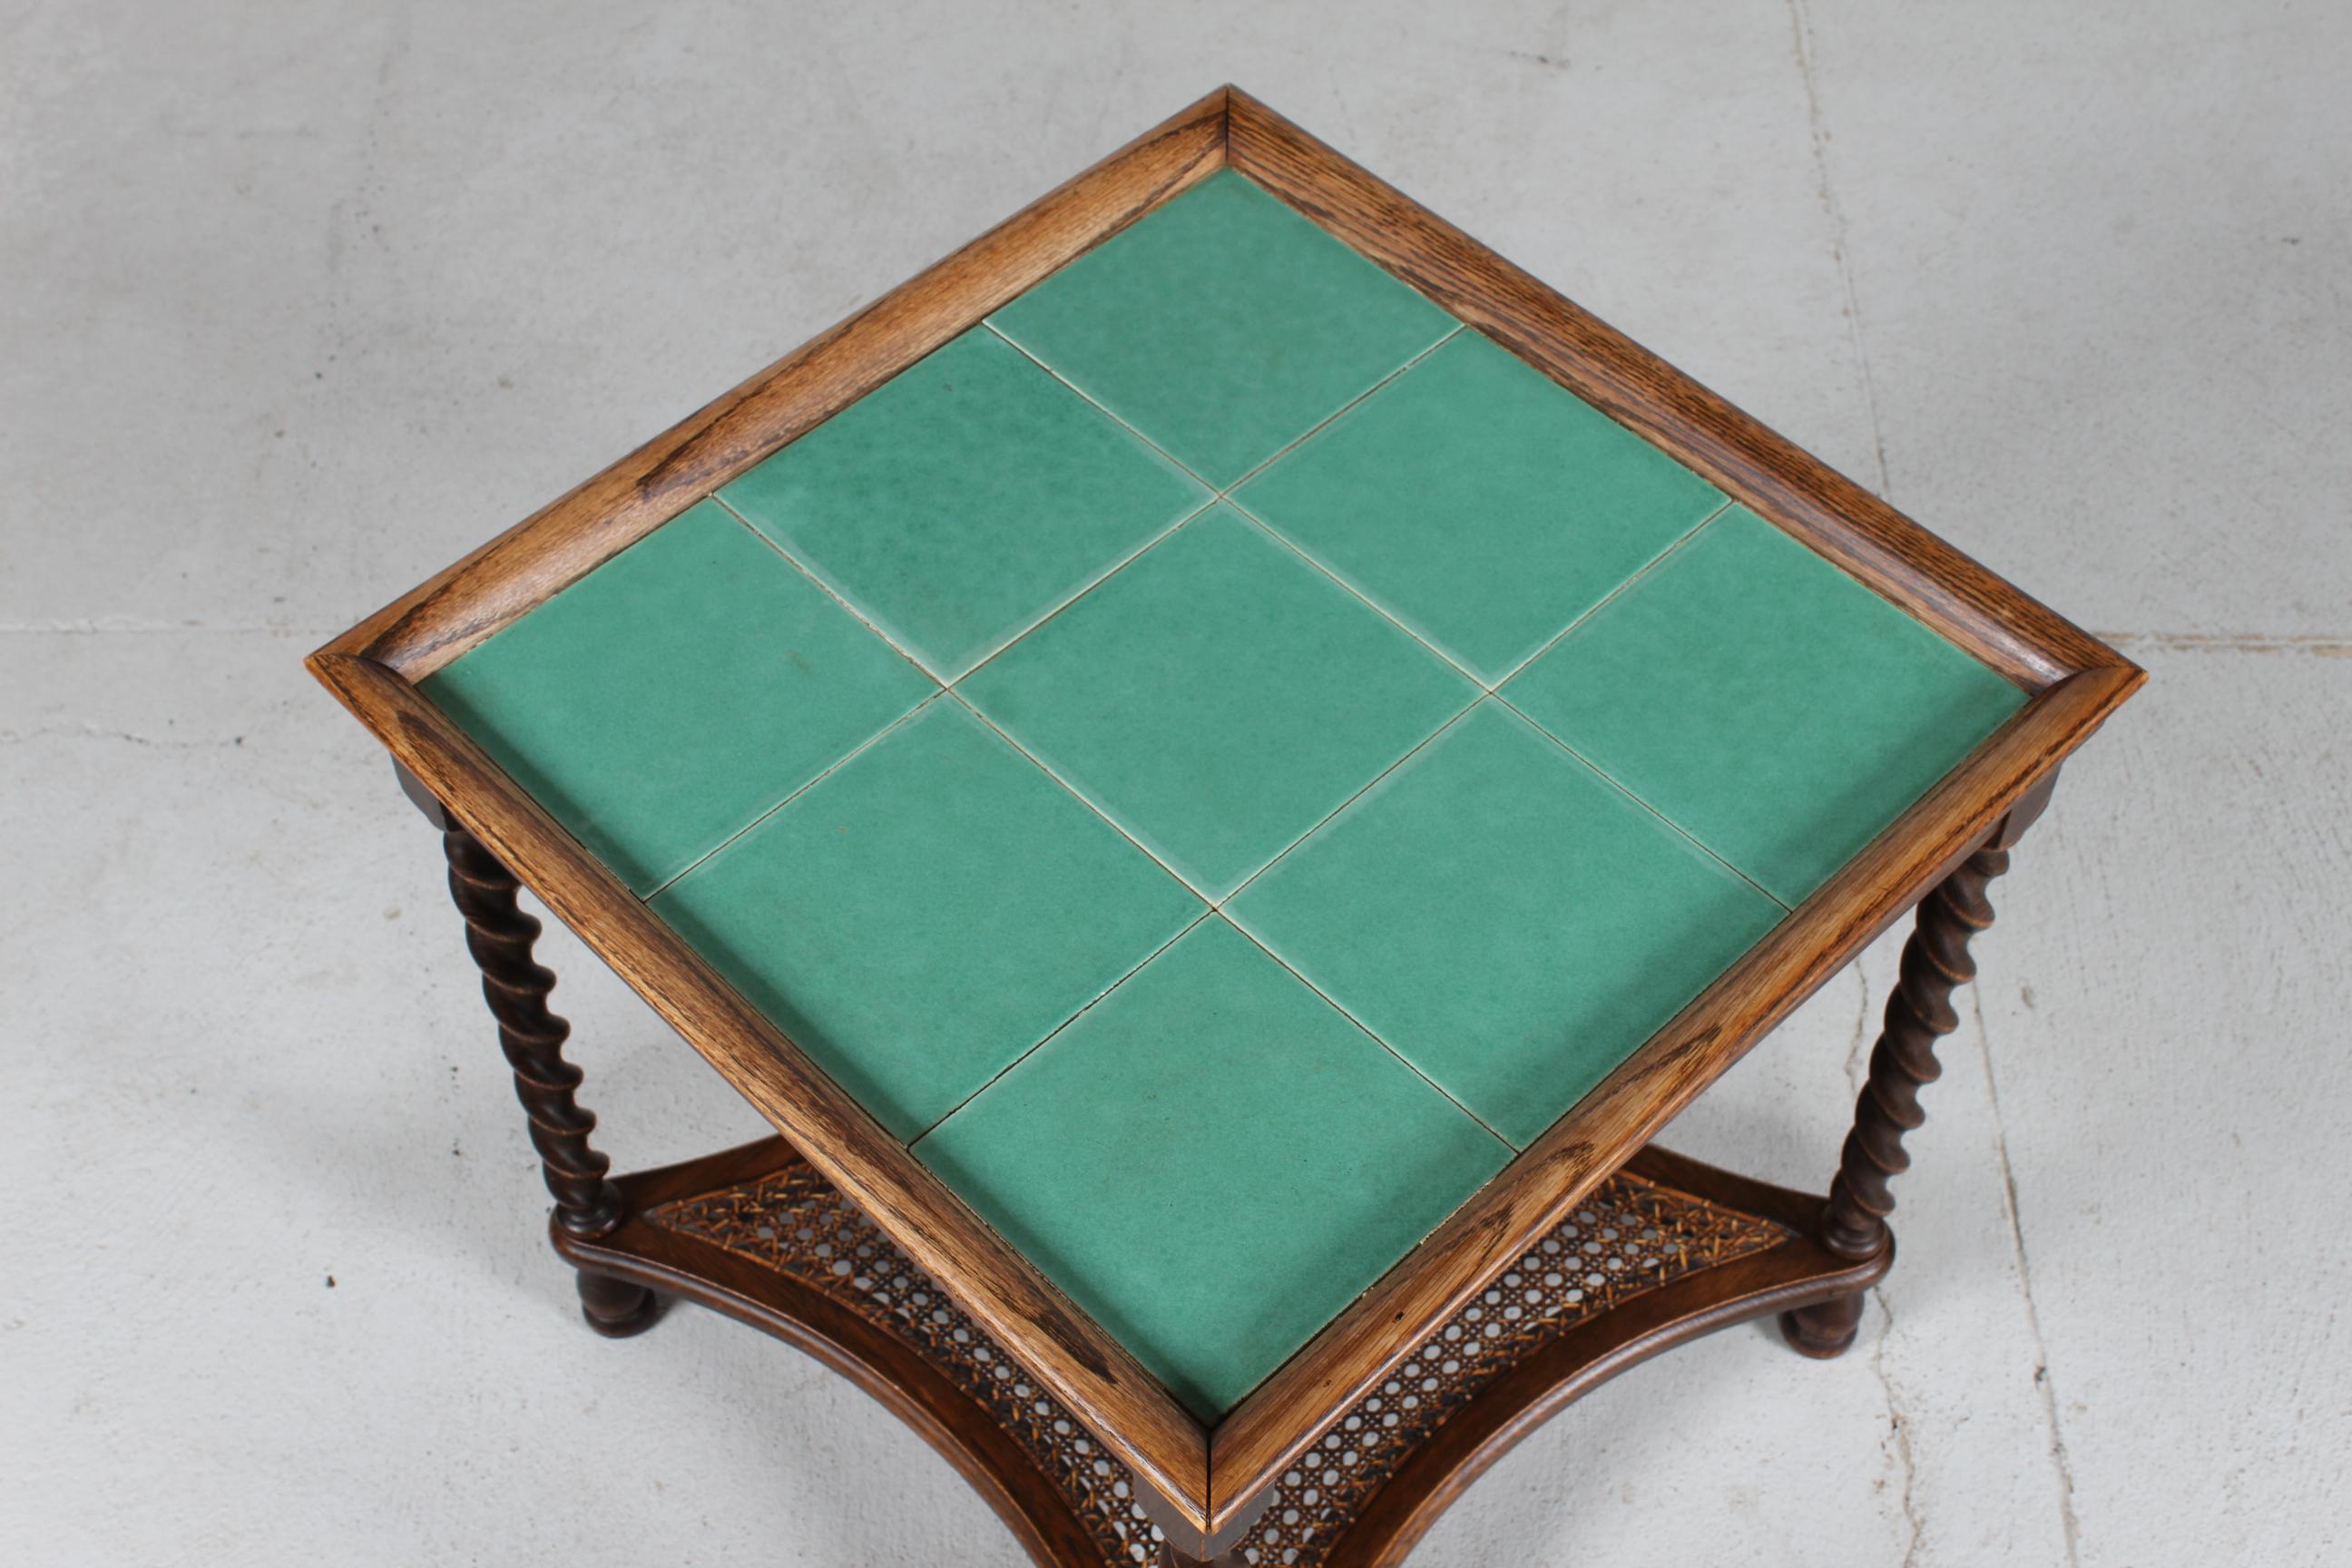 20th Century Art Deco Side Table with Jade Green Tiles by Danish Cabinetmaker, 1930-1940s